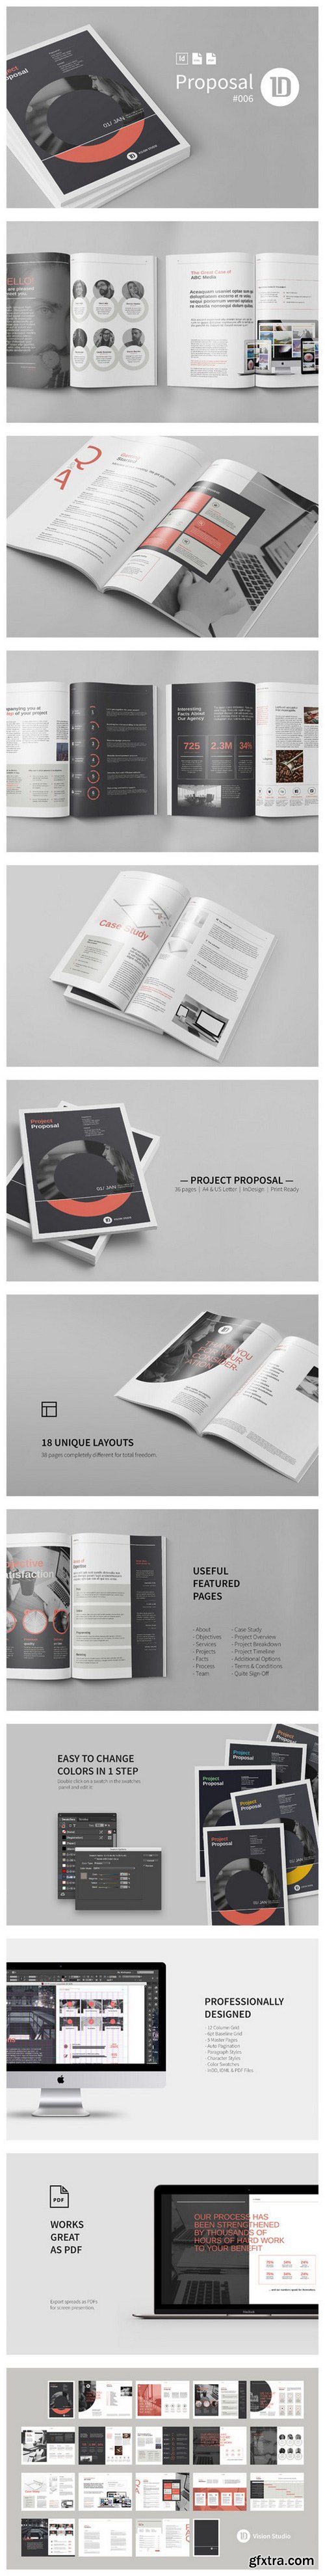 CM - Project Proposal Template 006 880762